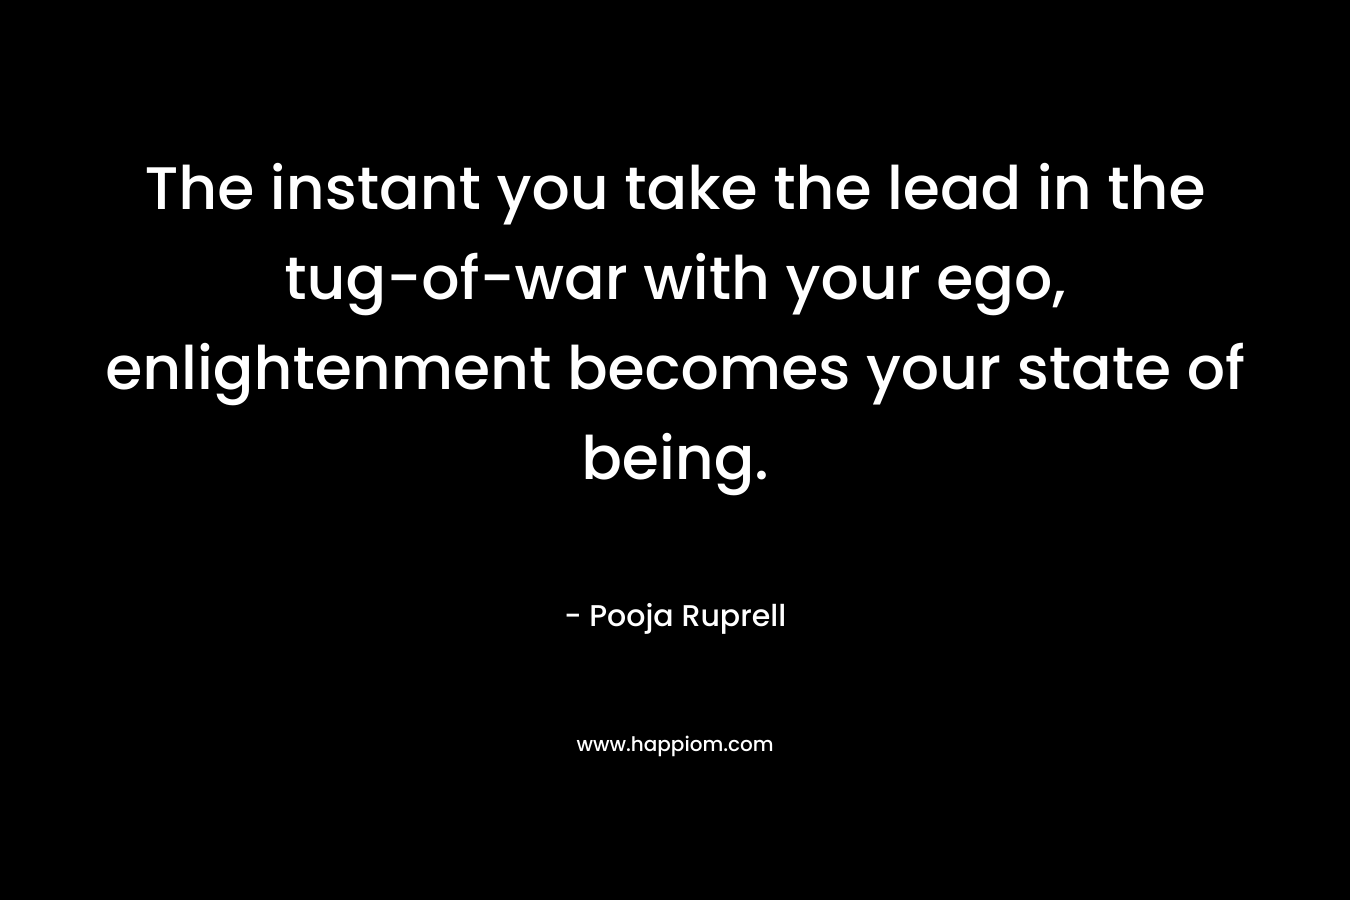 The instant you take the lead in the tug-of-war with your ego, enlightenment becomes your state of being.